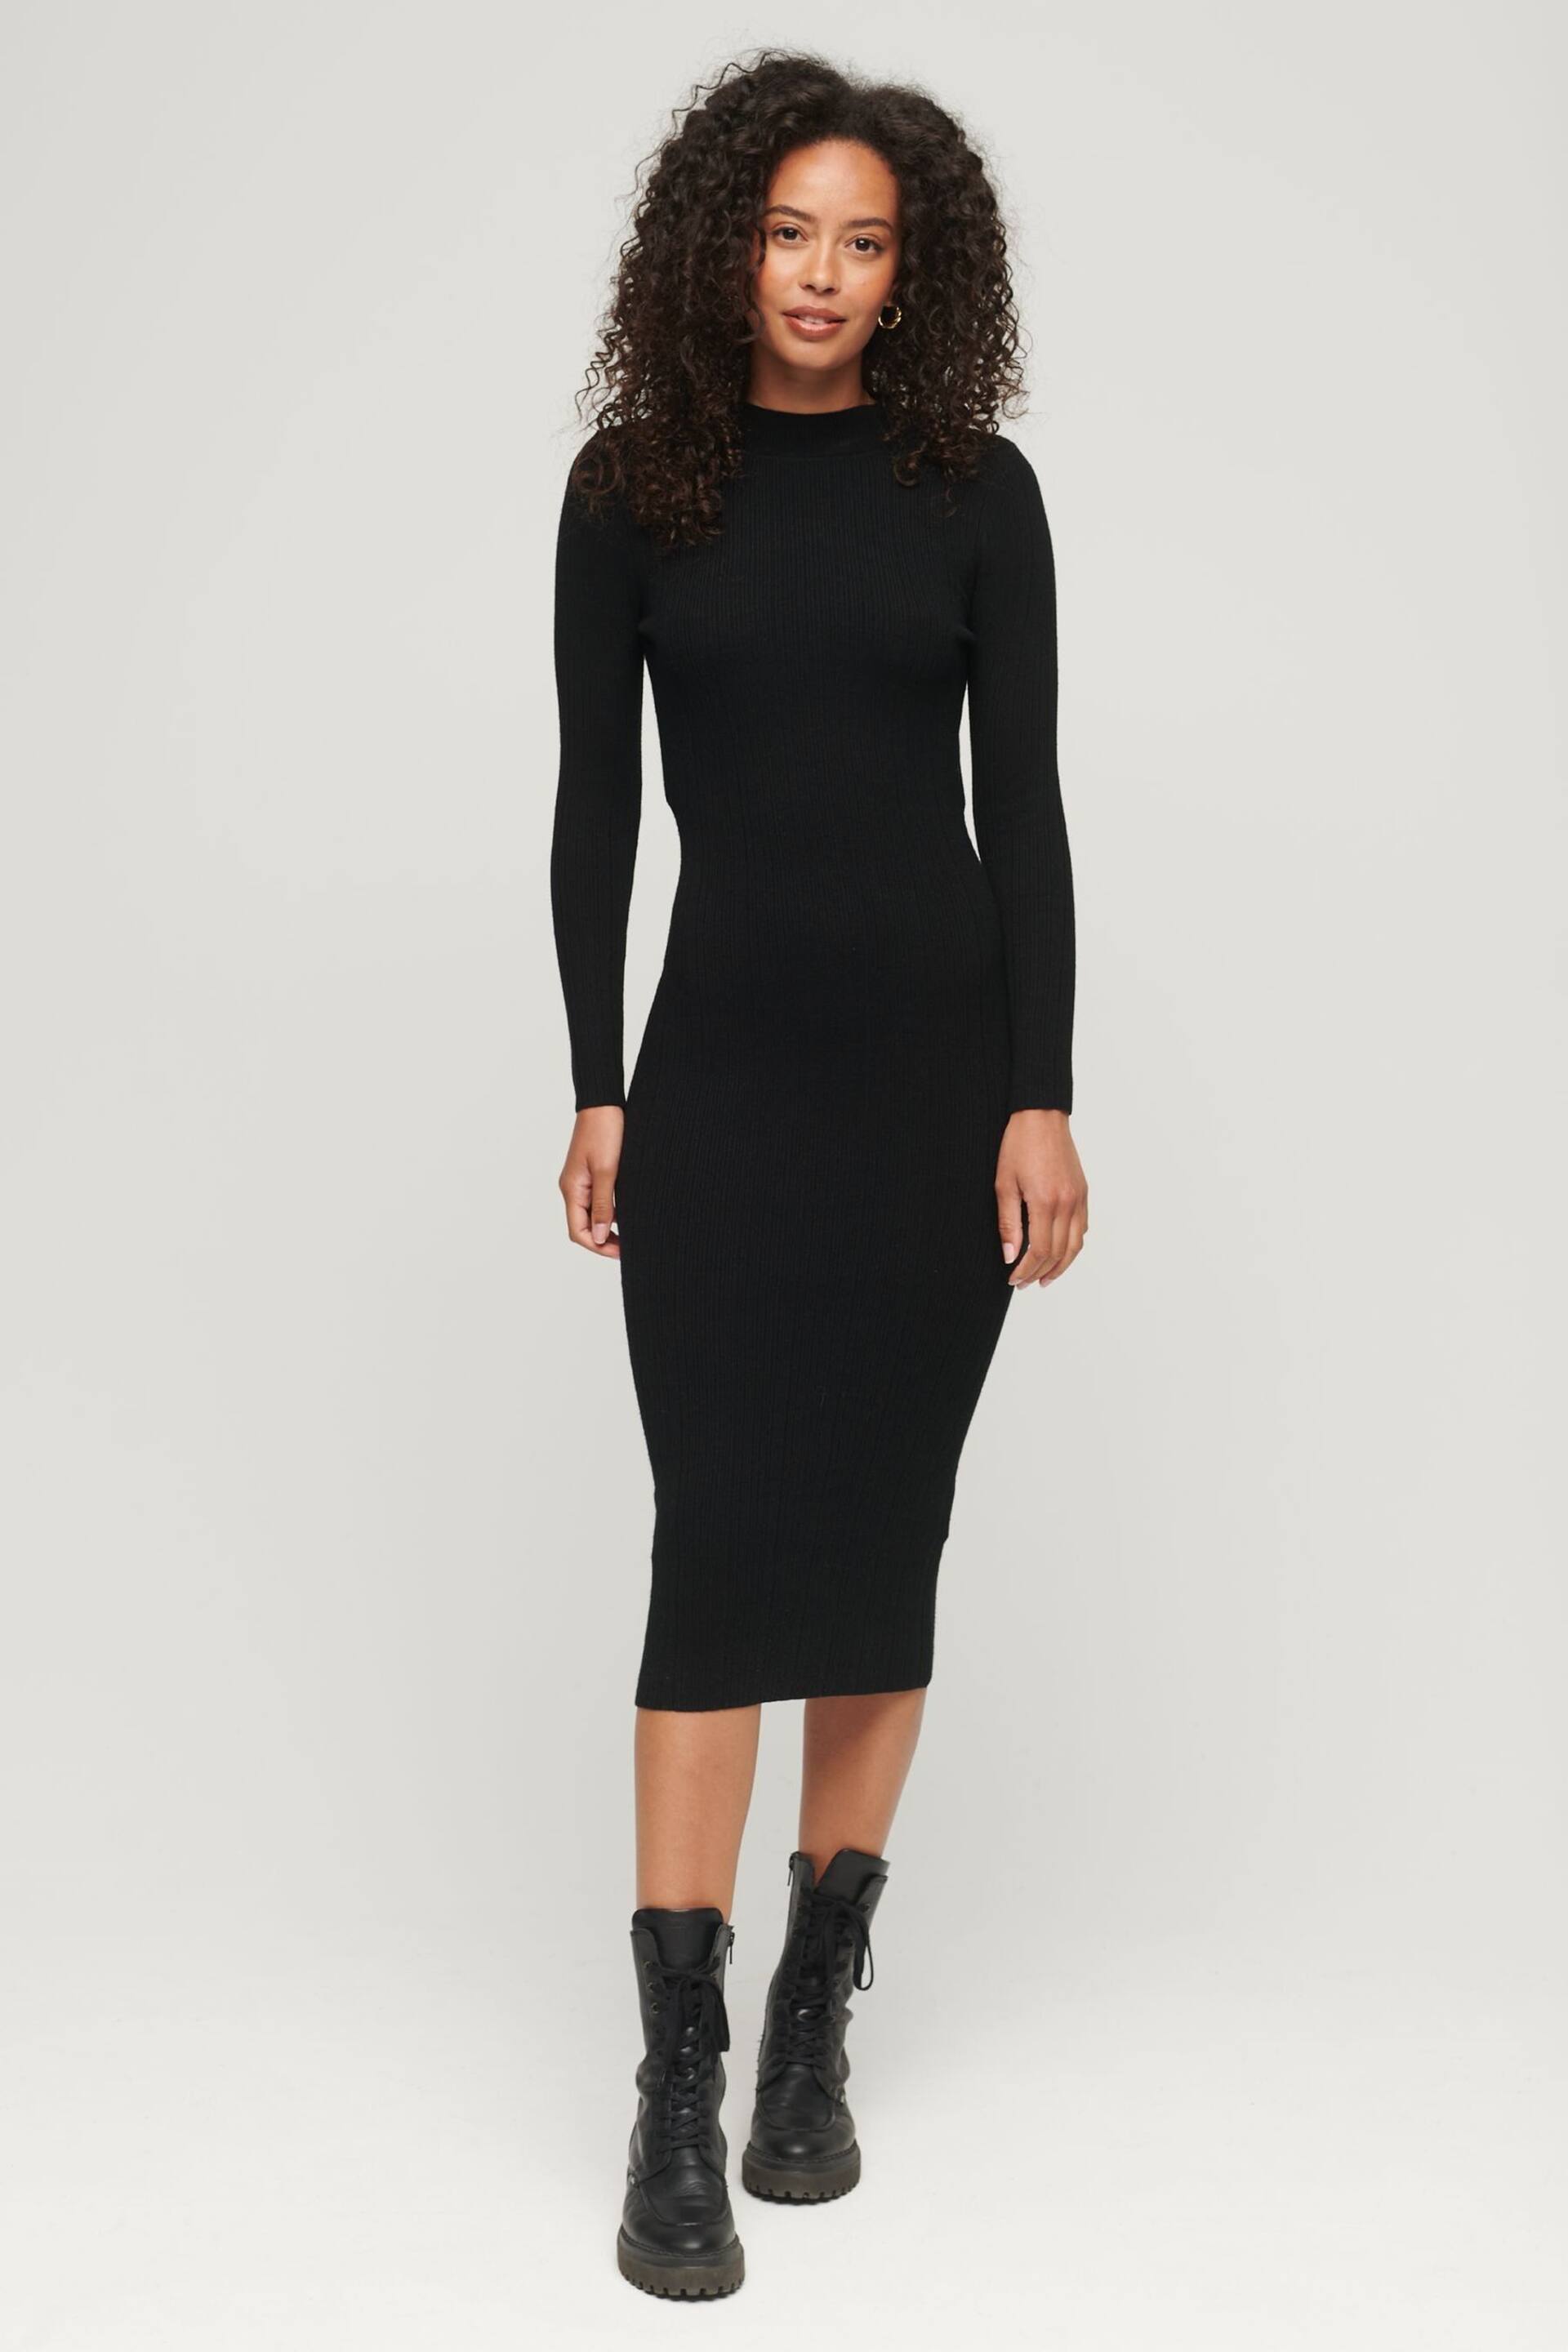 Superdry Black Backless Bodycon Midi Dress - Image 1 of 6